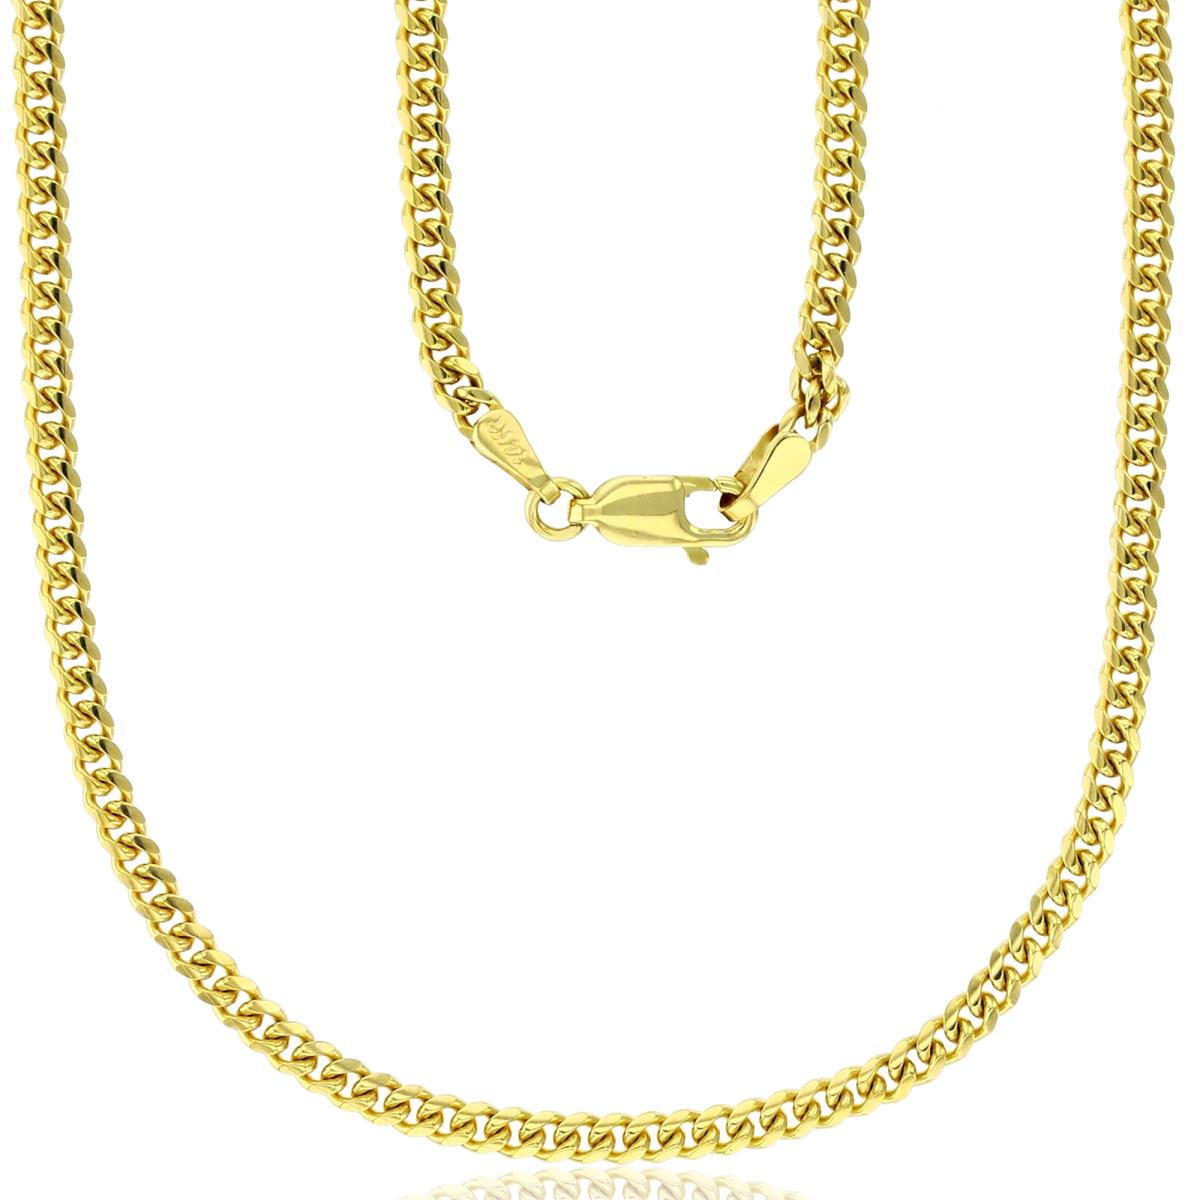 14K Yellow Gold 2.85mm 24" Solid Miami Cuban 080 Chain with Lobster Lock